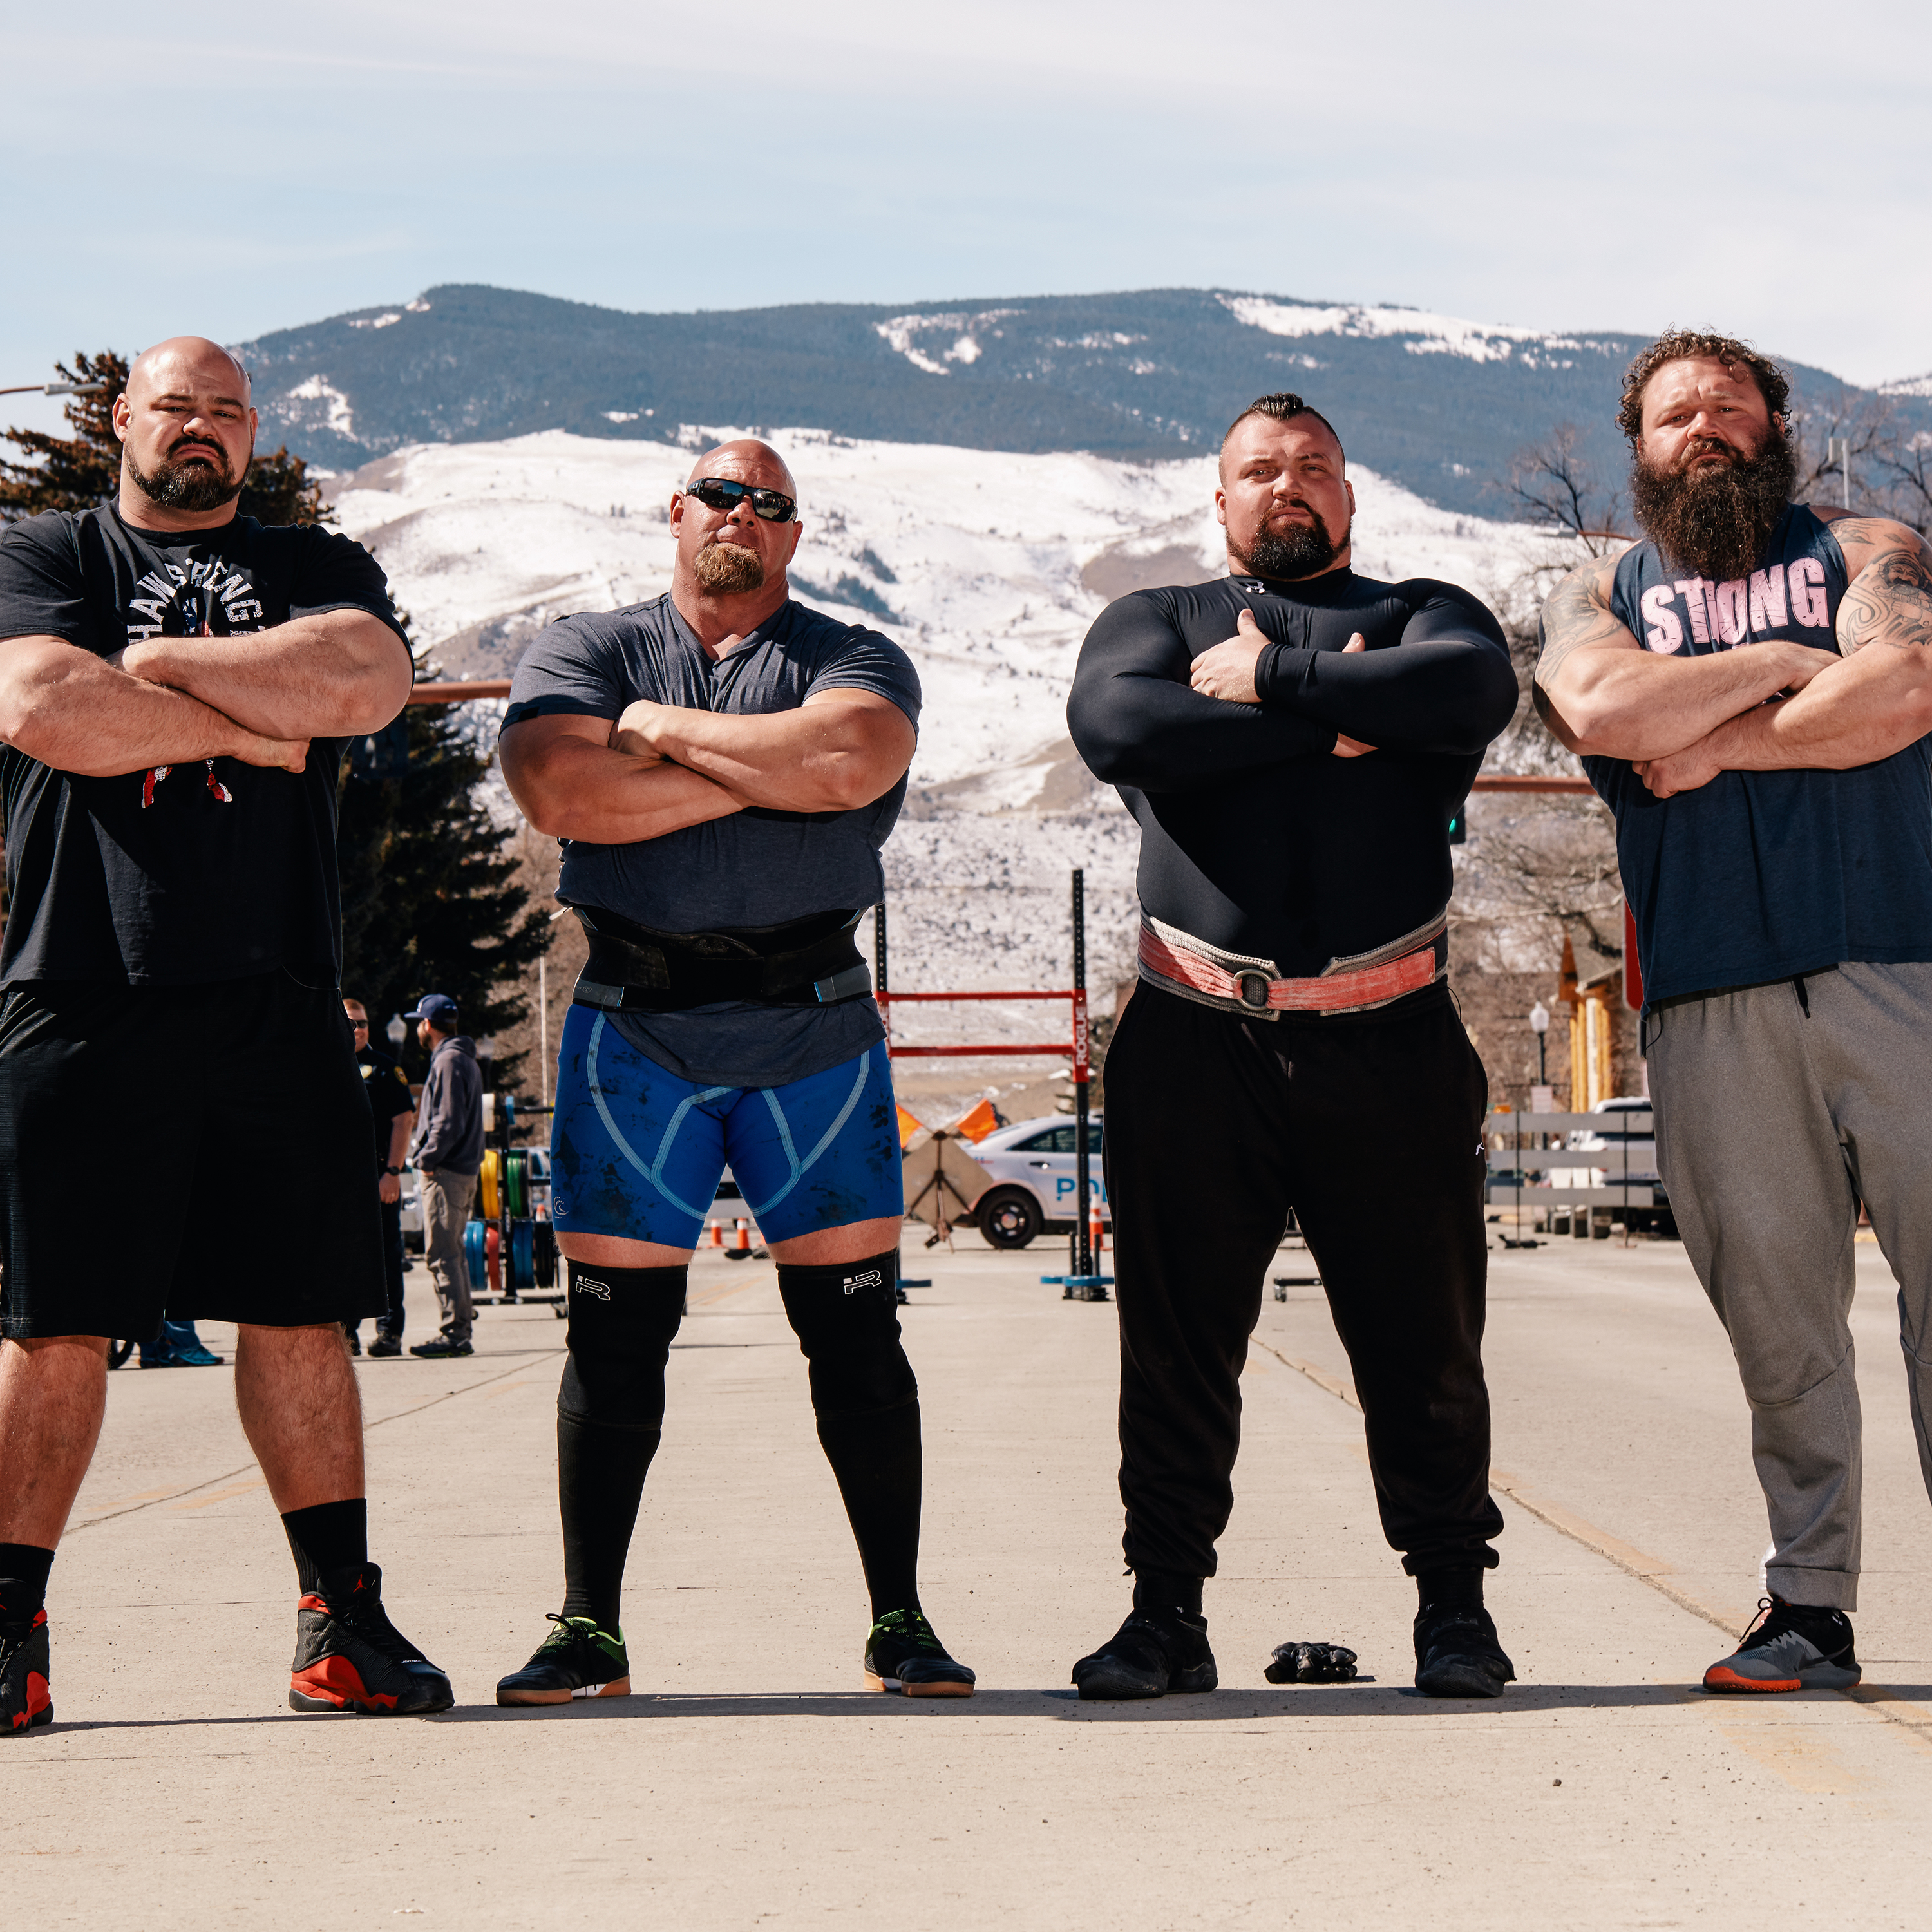 How to watch 2021 World's Strongest Man competition 